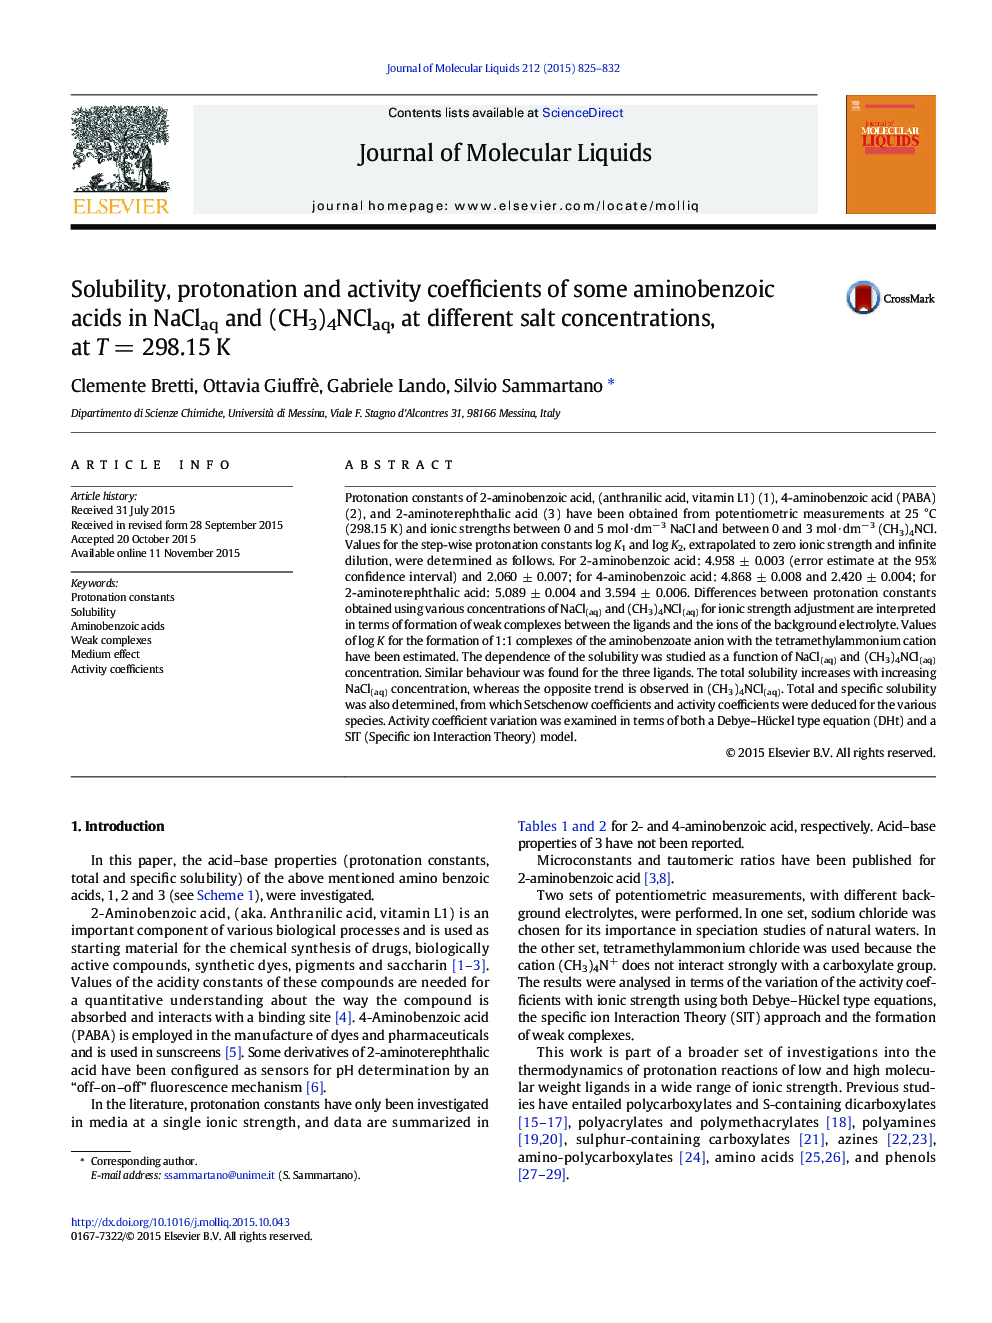 Solubility, protonation and activity coefficients of some aminobenzoic acids in NaClaq and (CH3)4NClaq, at different salt concentrations, at TÂ =Â 298.15Â K